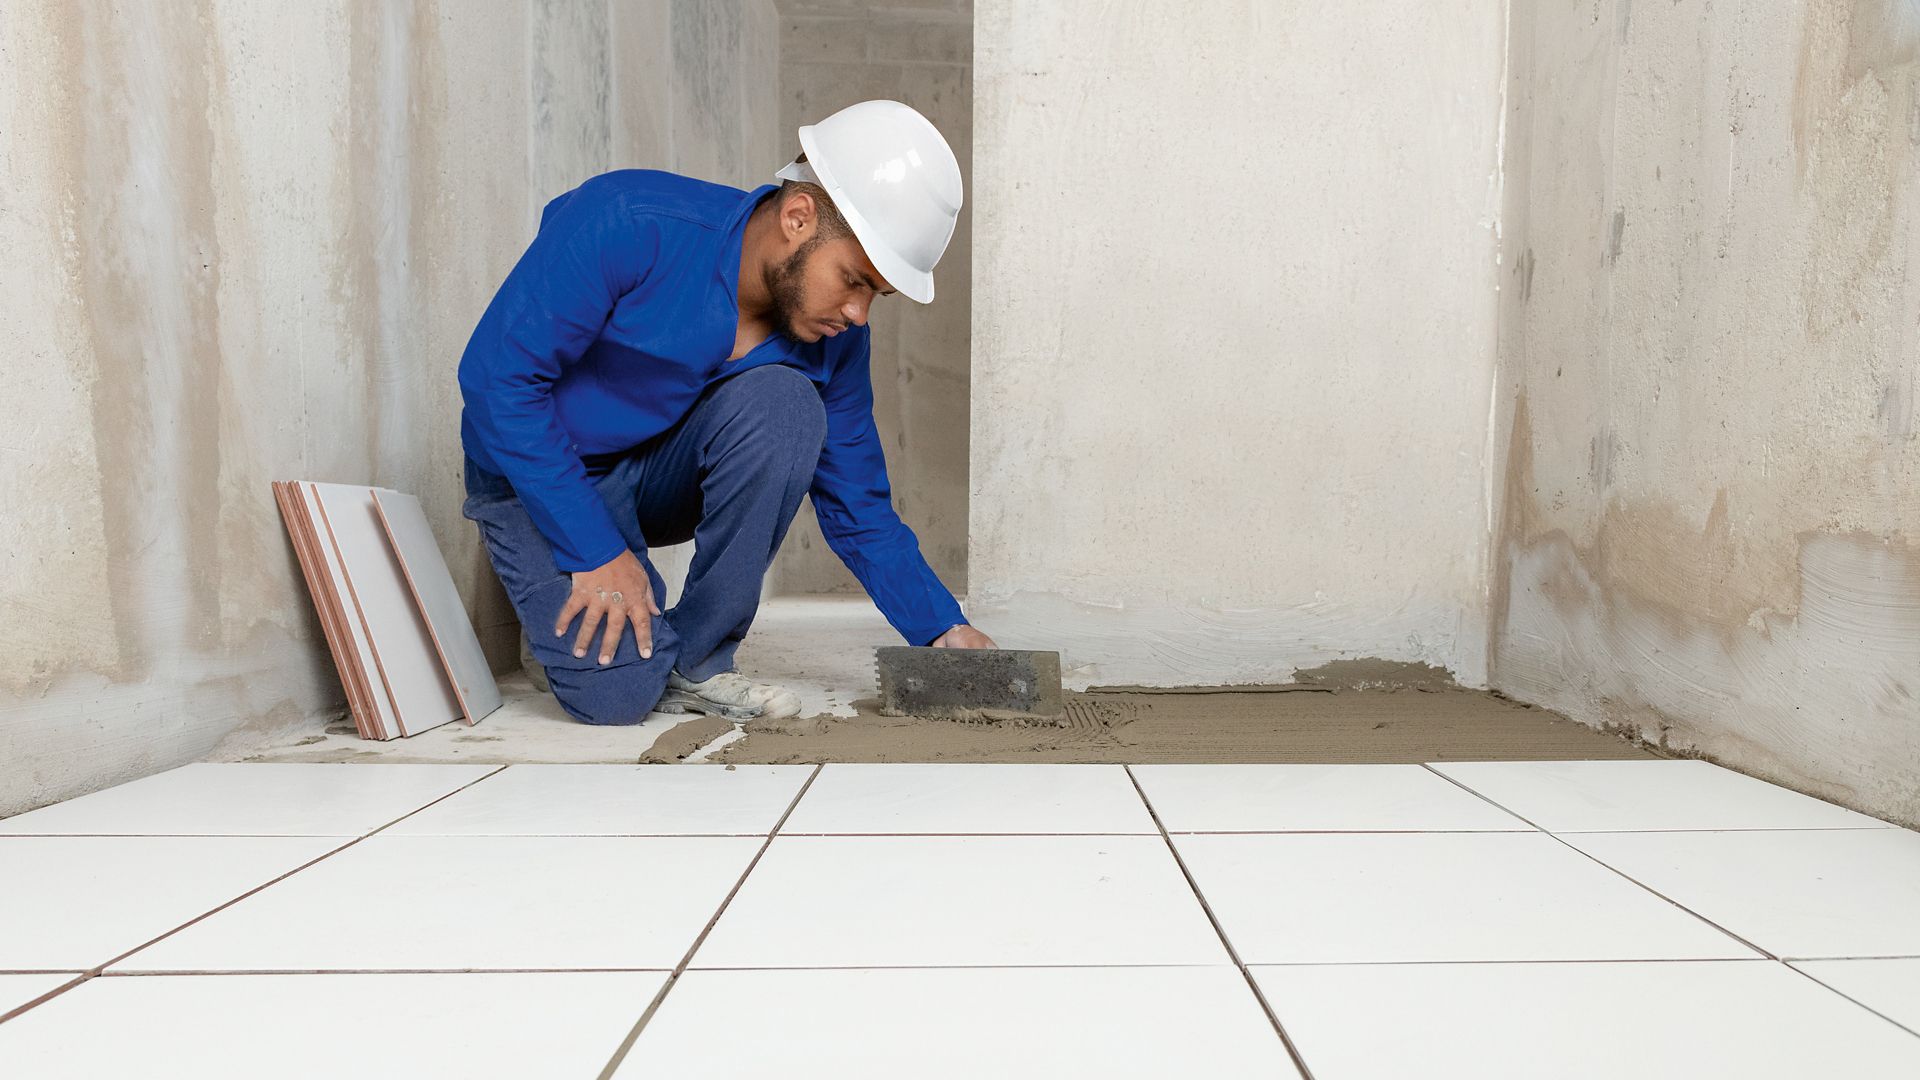 The craftsmen are trained by Sika in advance to apply its specialty and adhesive mortar safely and efficiently. Together with the high quality of the products, this approach helps to ensure the durability of the apartments.